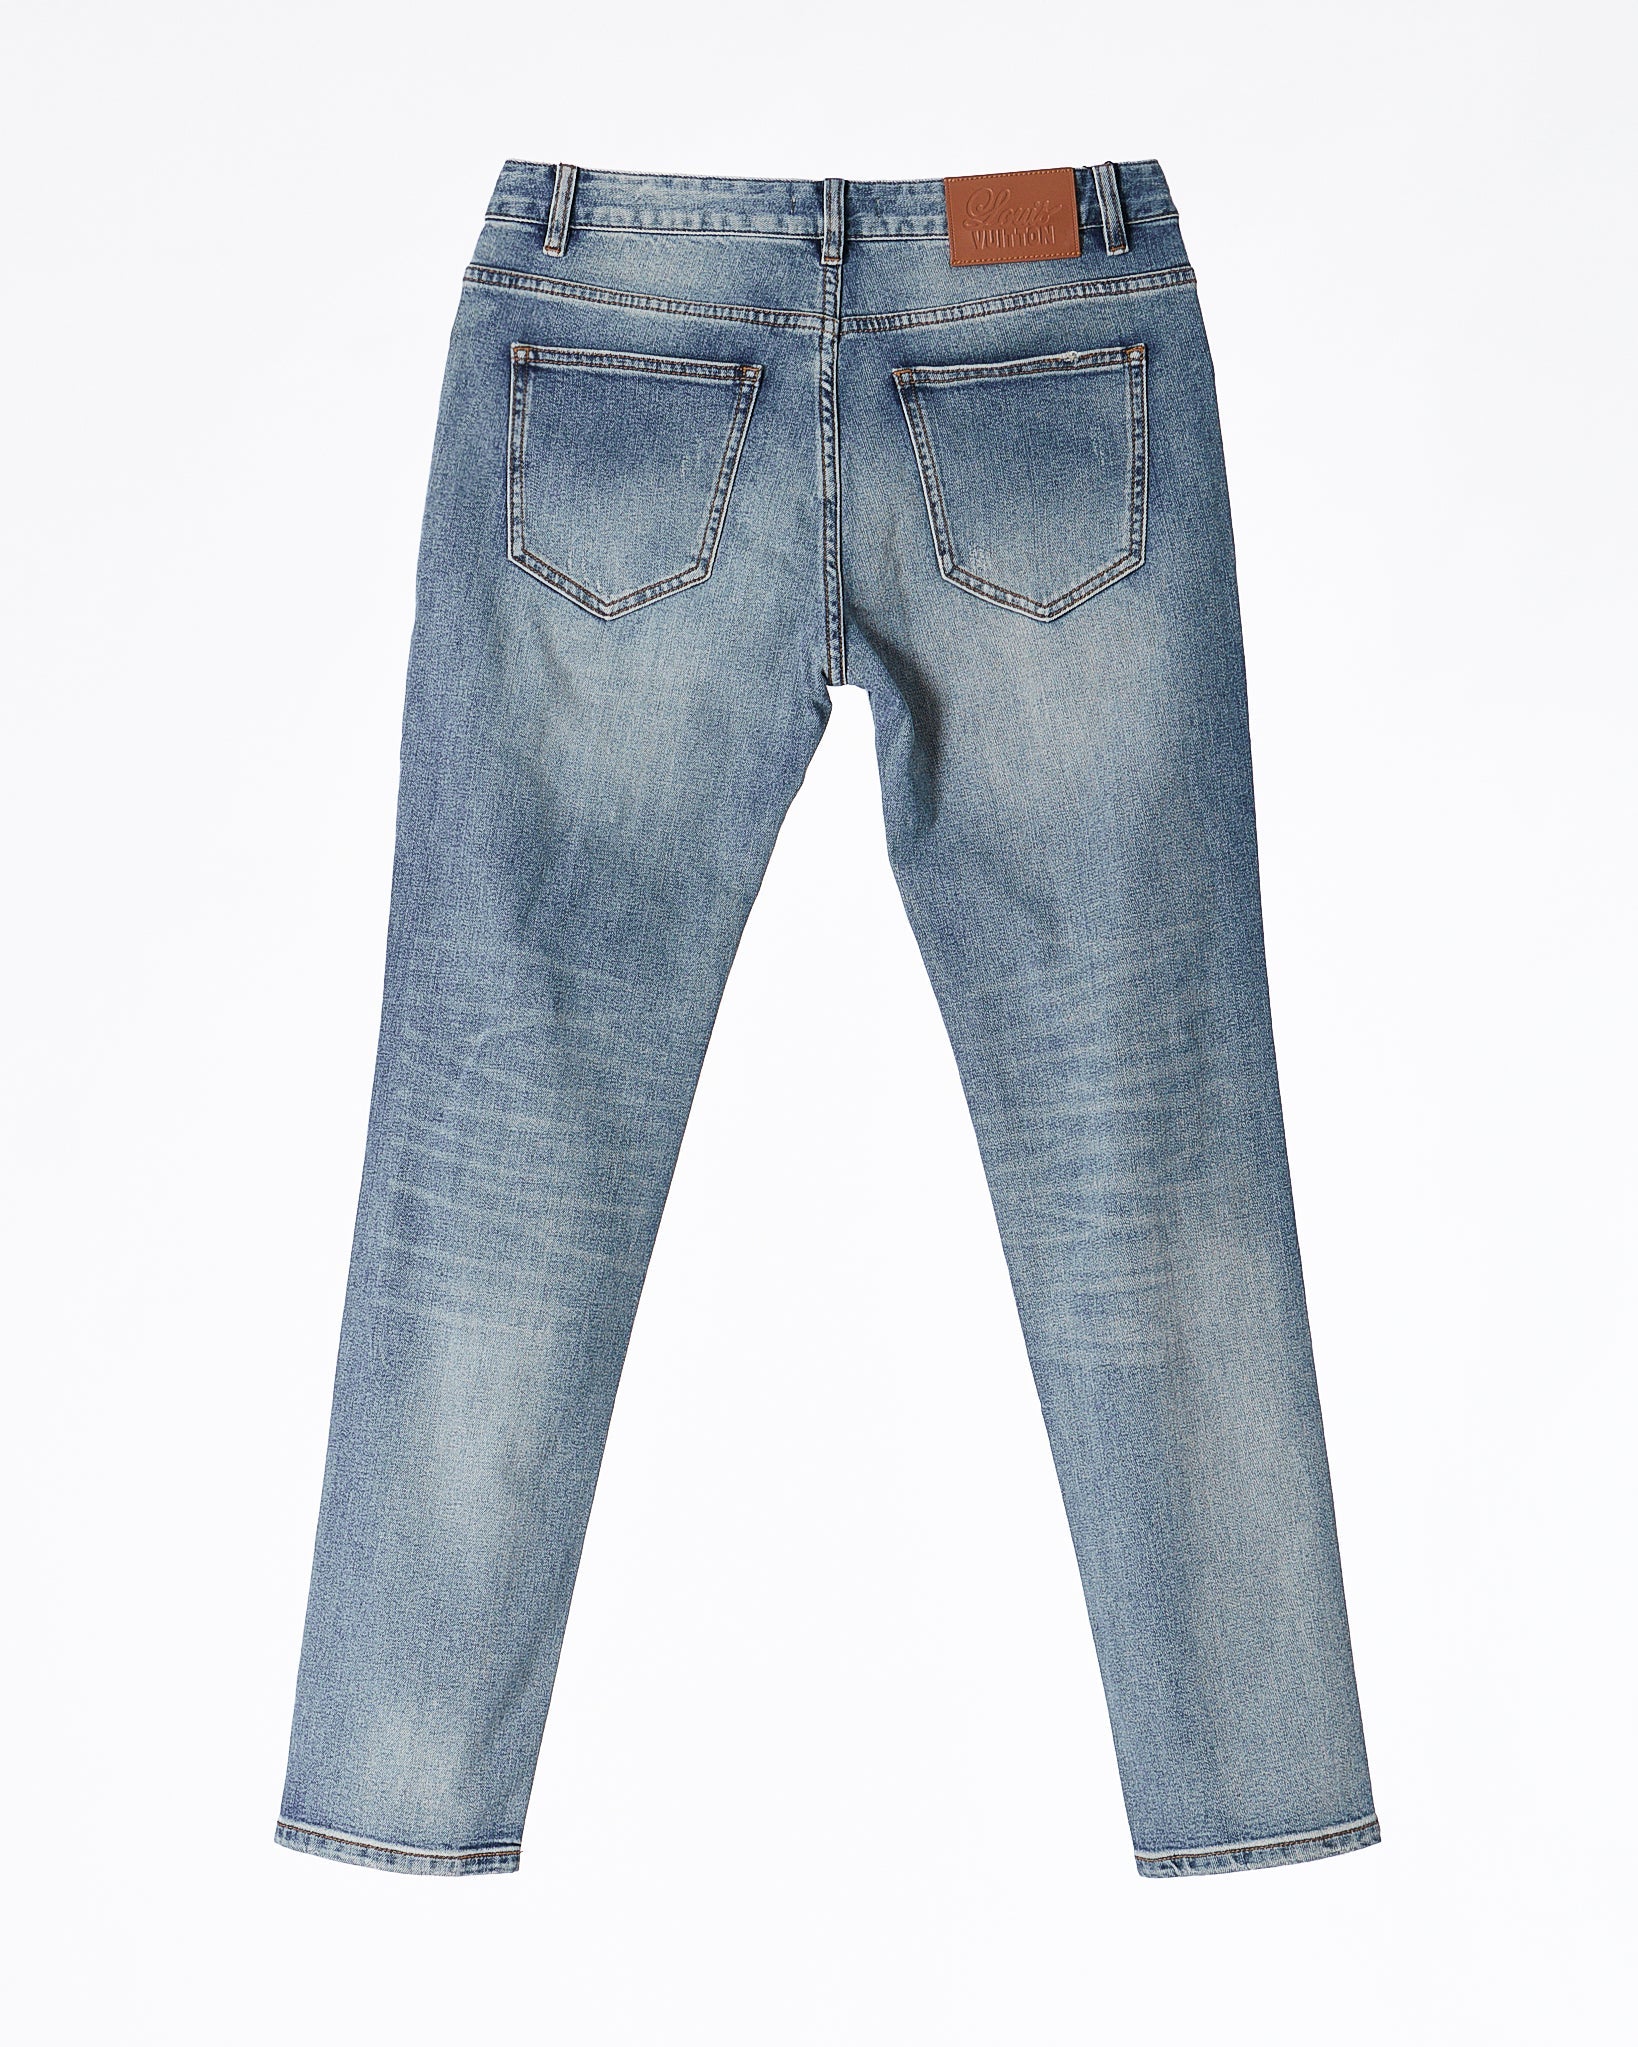 MOI OUTFIT-LV Logo Embroidered Men Jeans 68.90